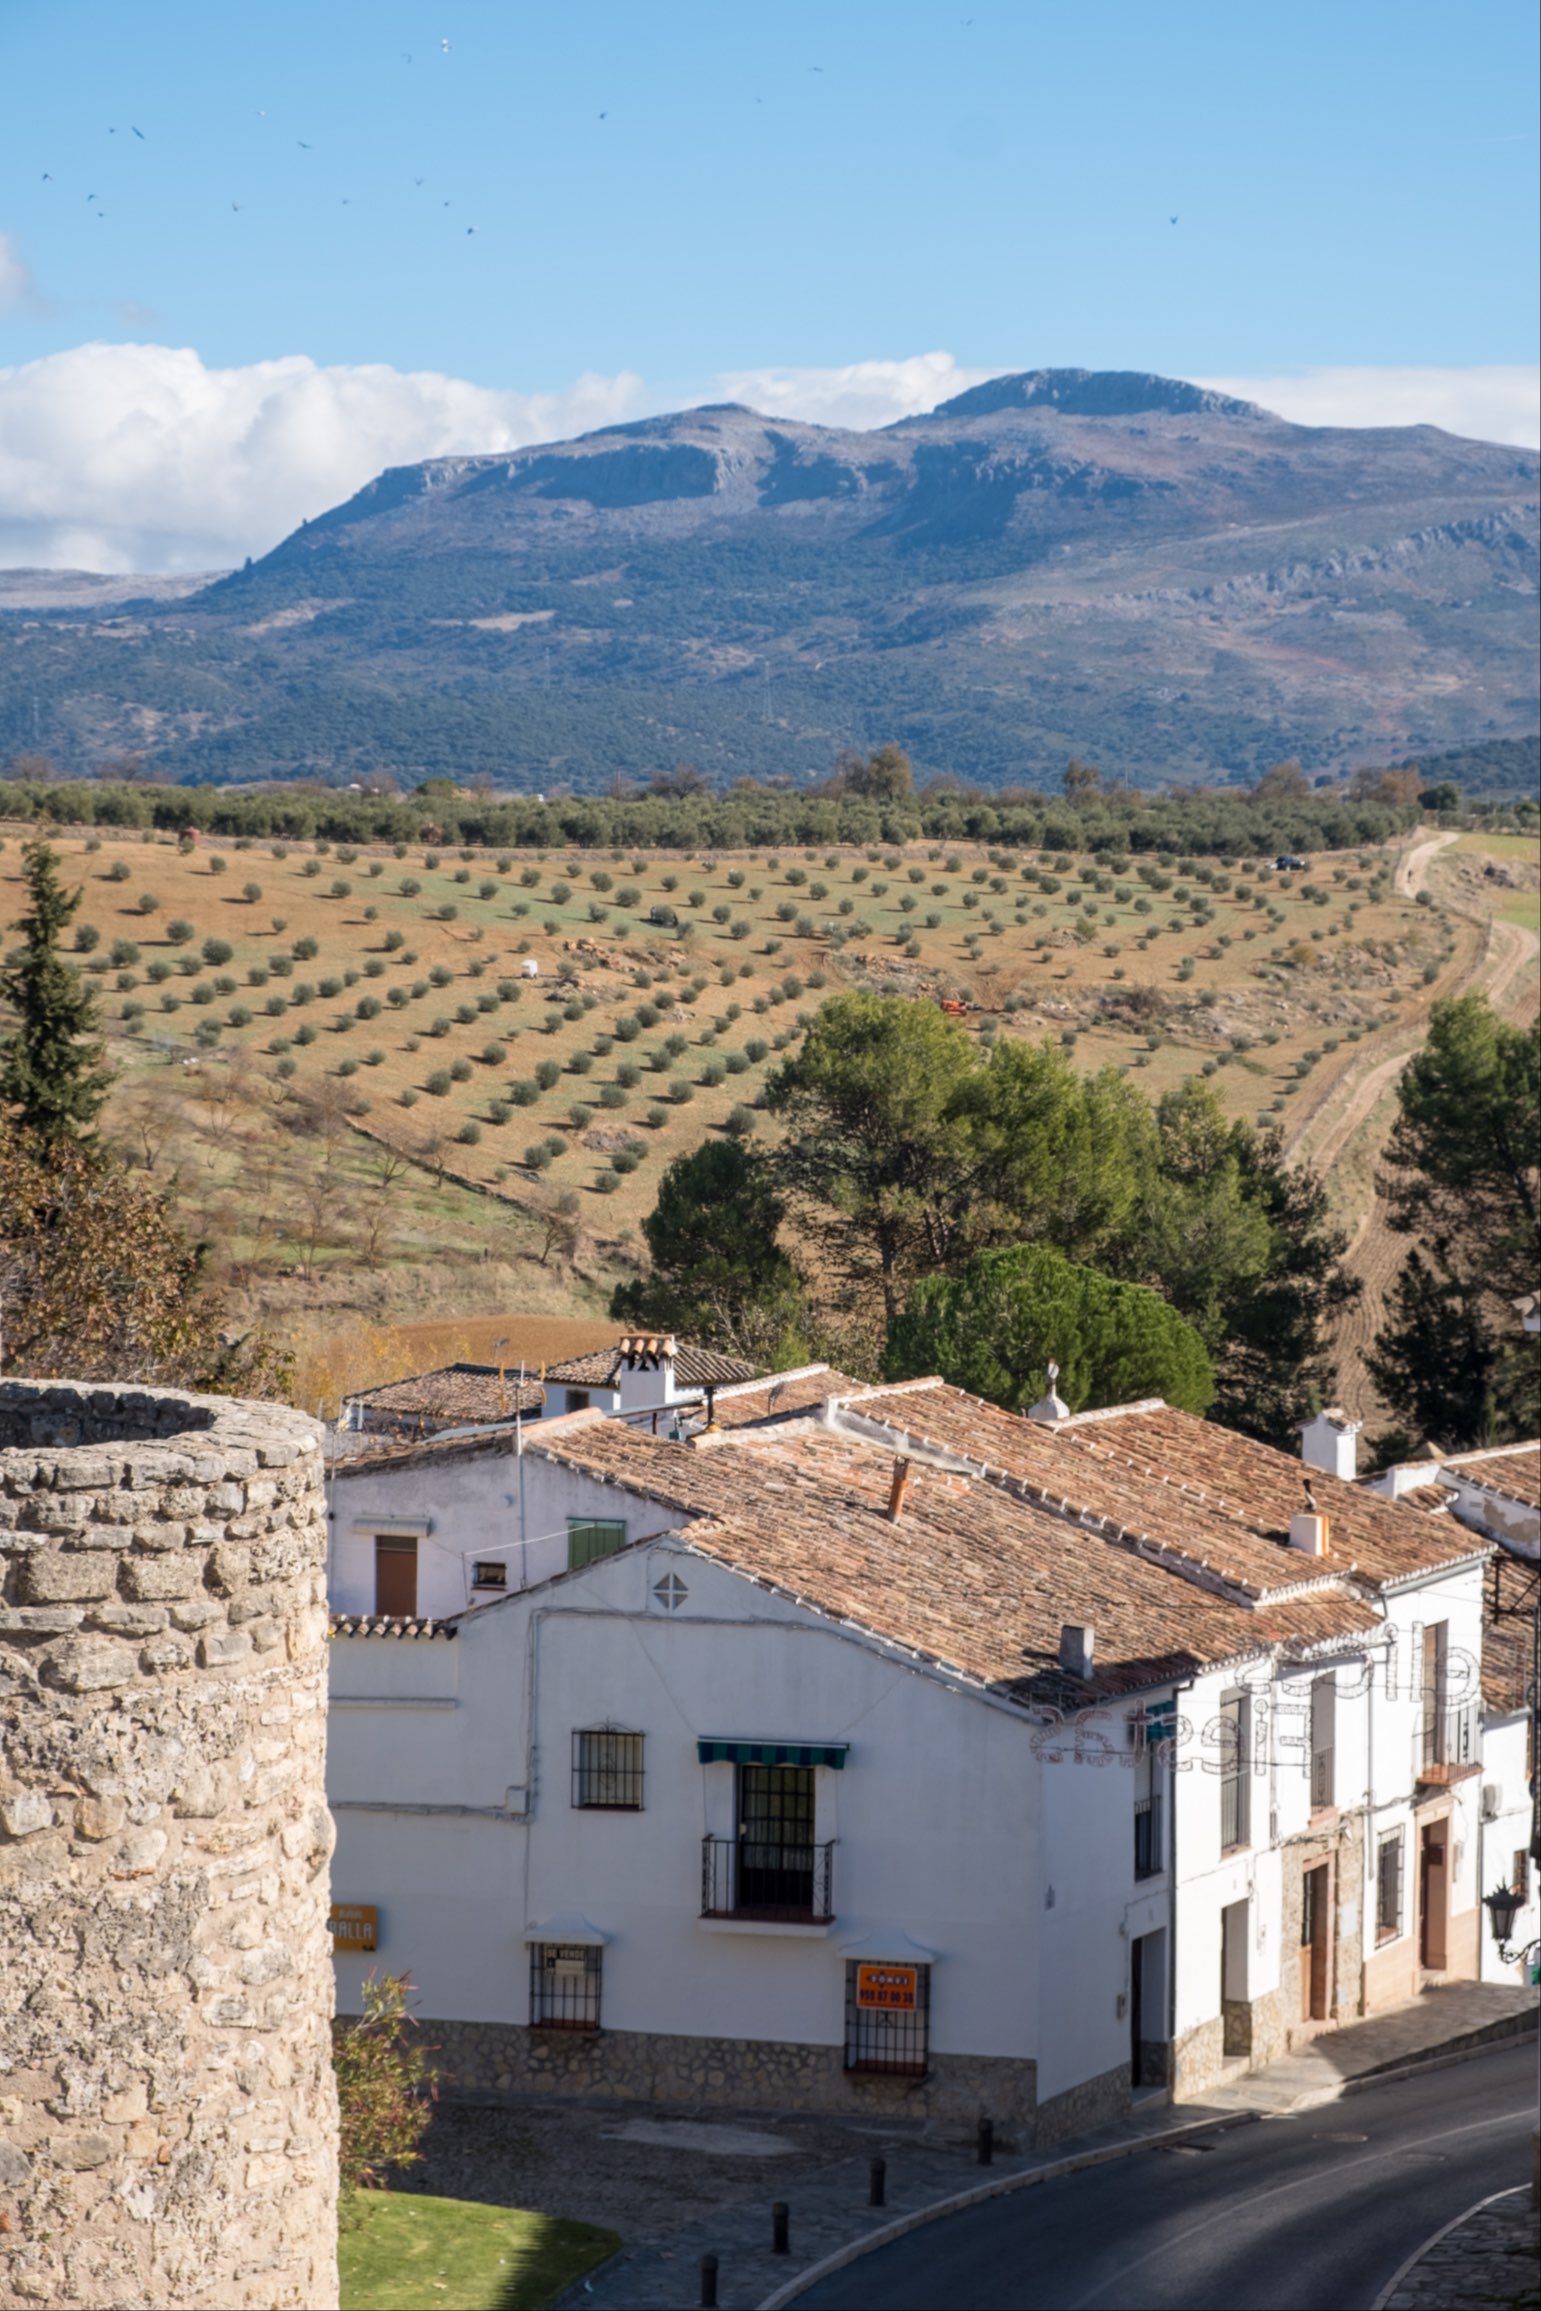 Sierra Nevada mountains and whitewashed houses in Ronda